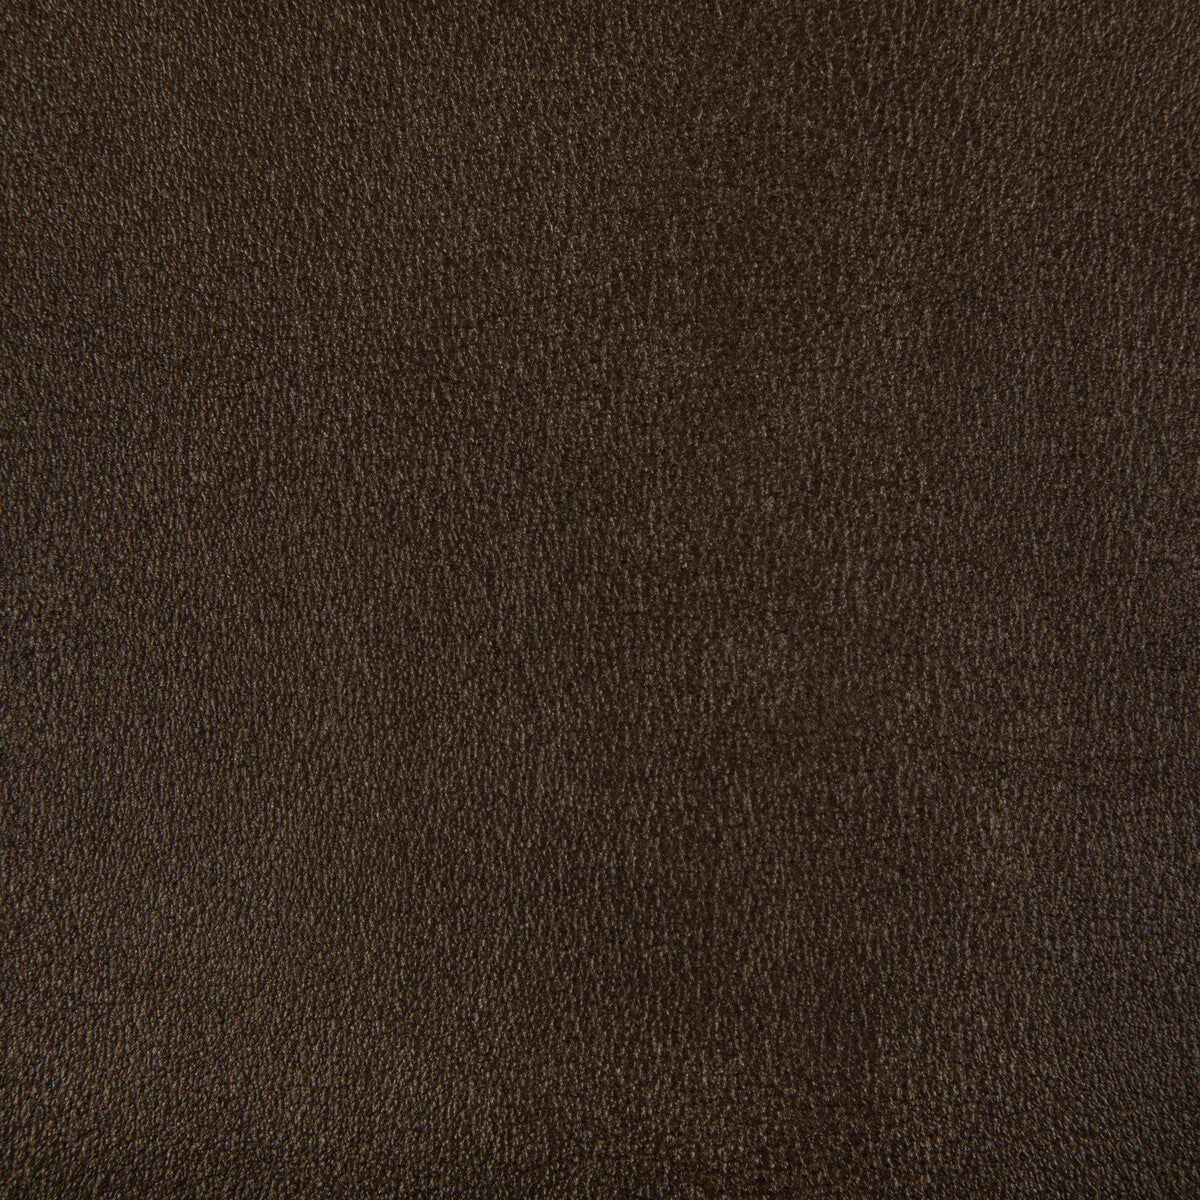 Agatha fabric in bronze color - pattern AGATHA.624.0 - by Kravet Contract